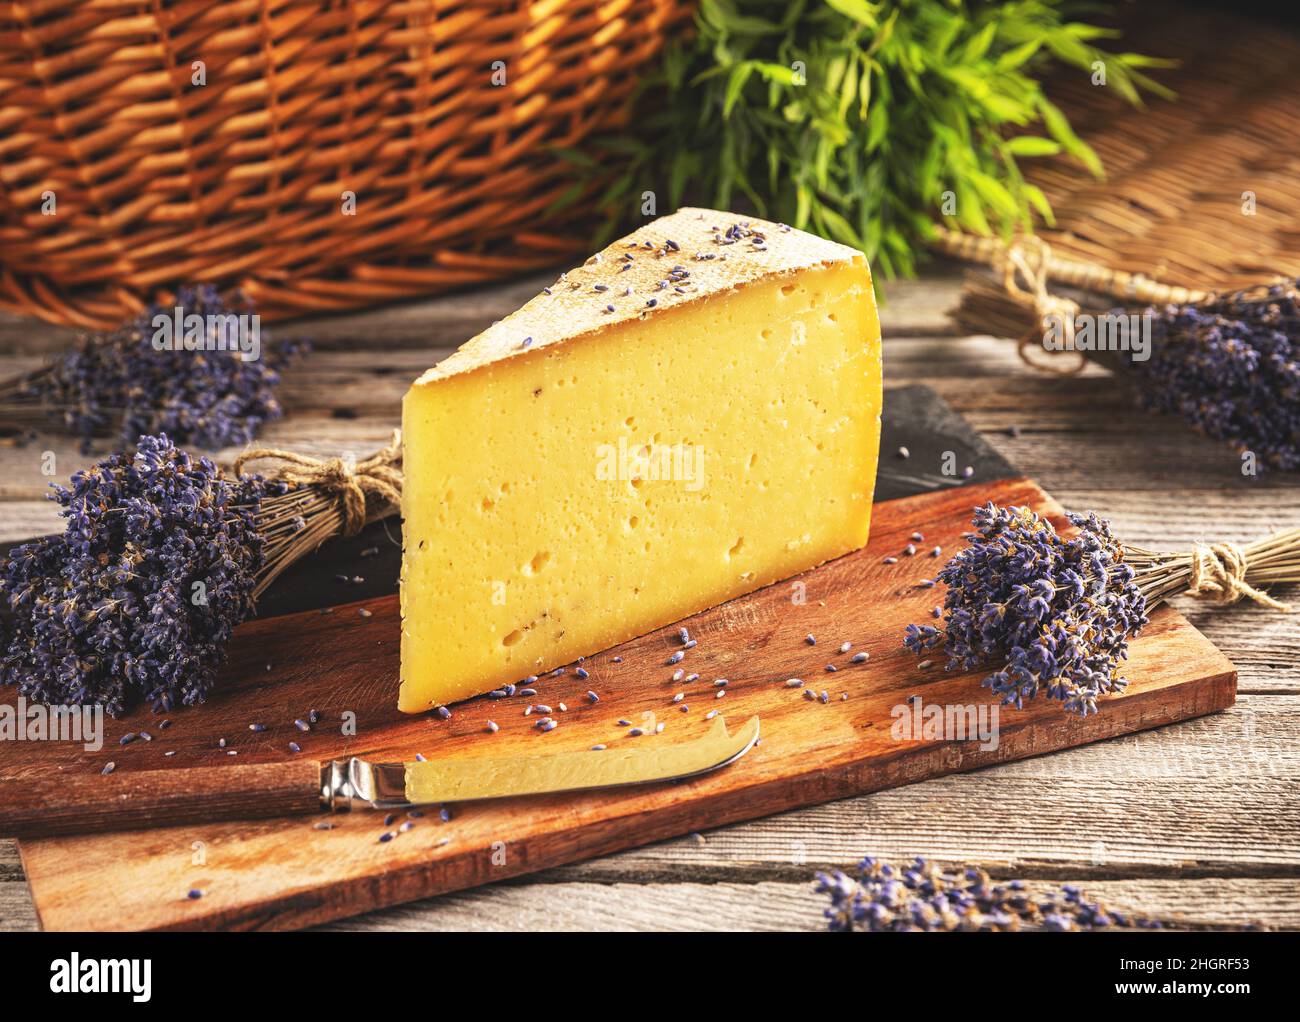 Lavender cheese plate with dry lavender flowers Stock Photo by Portoprens